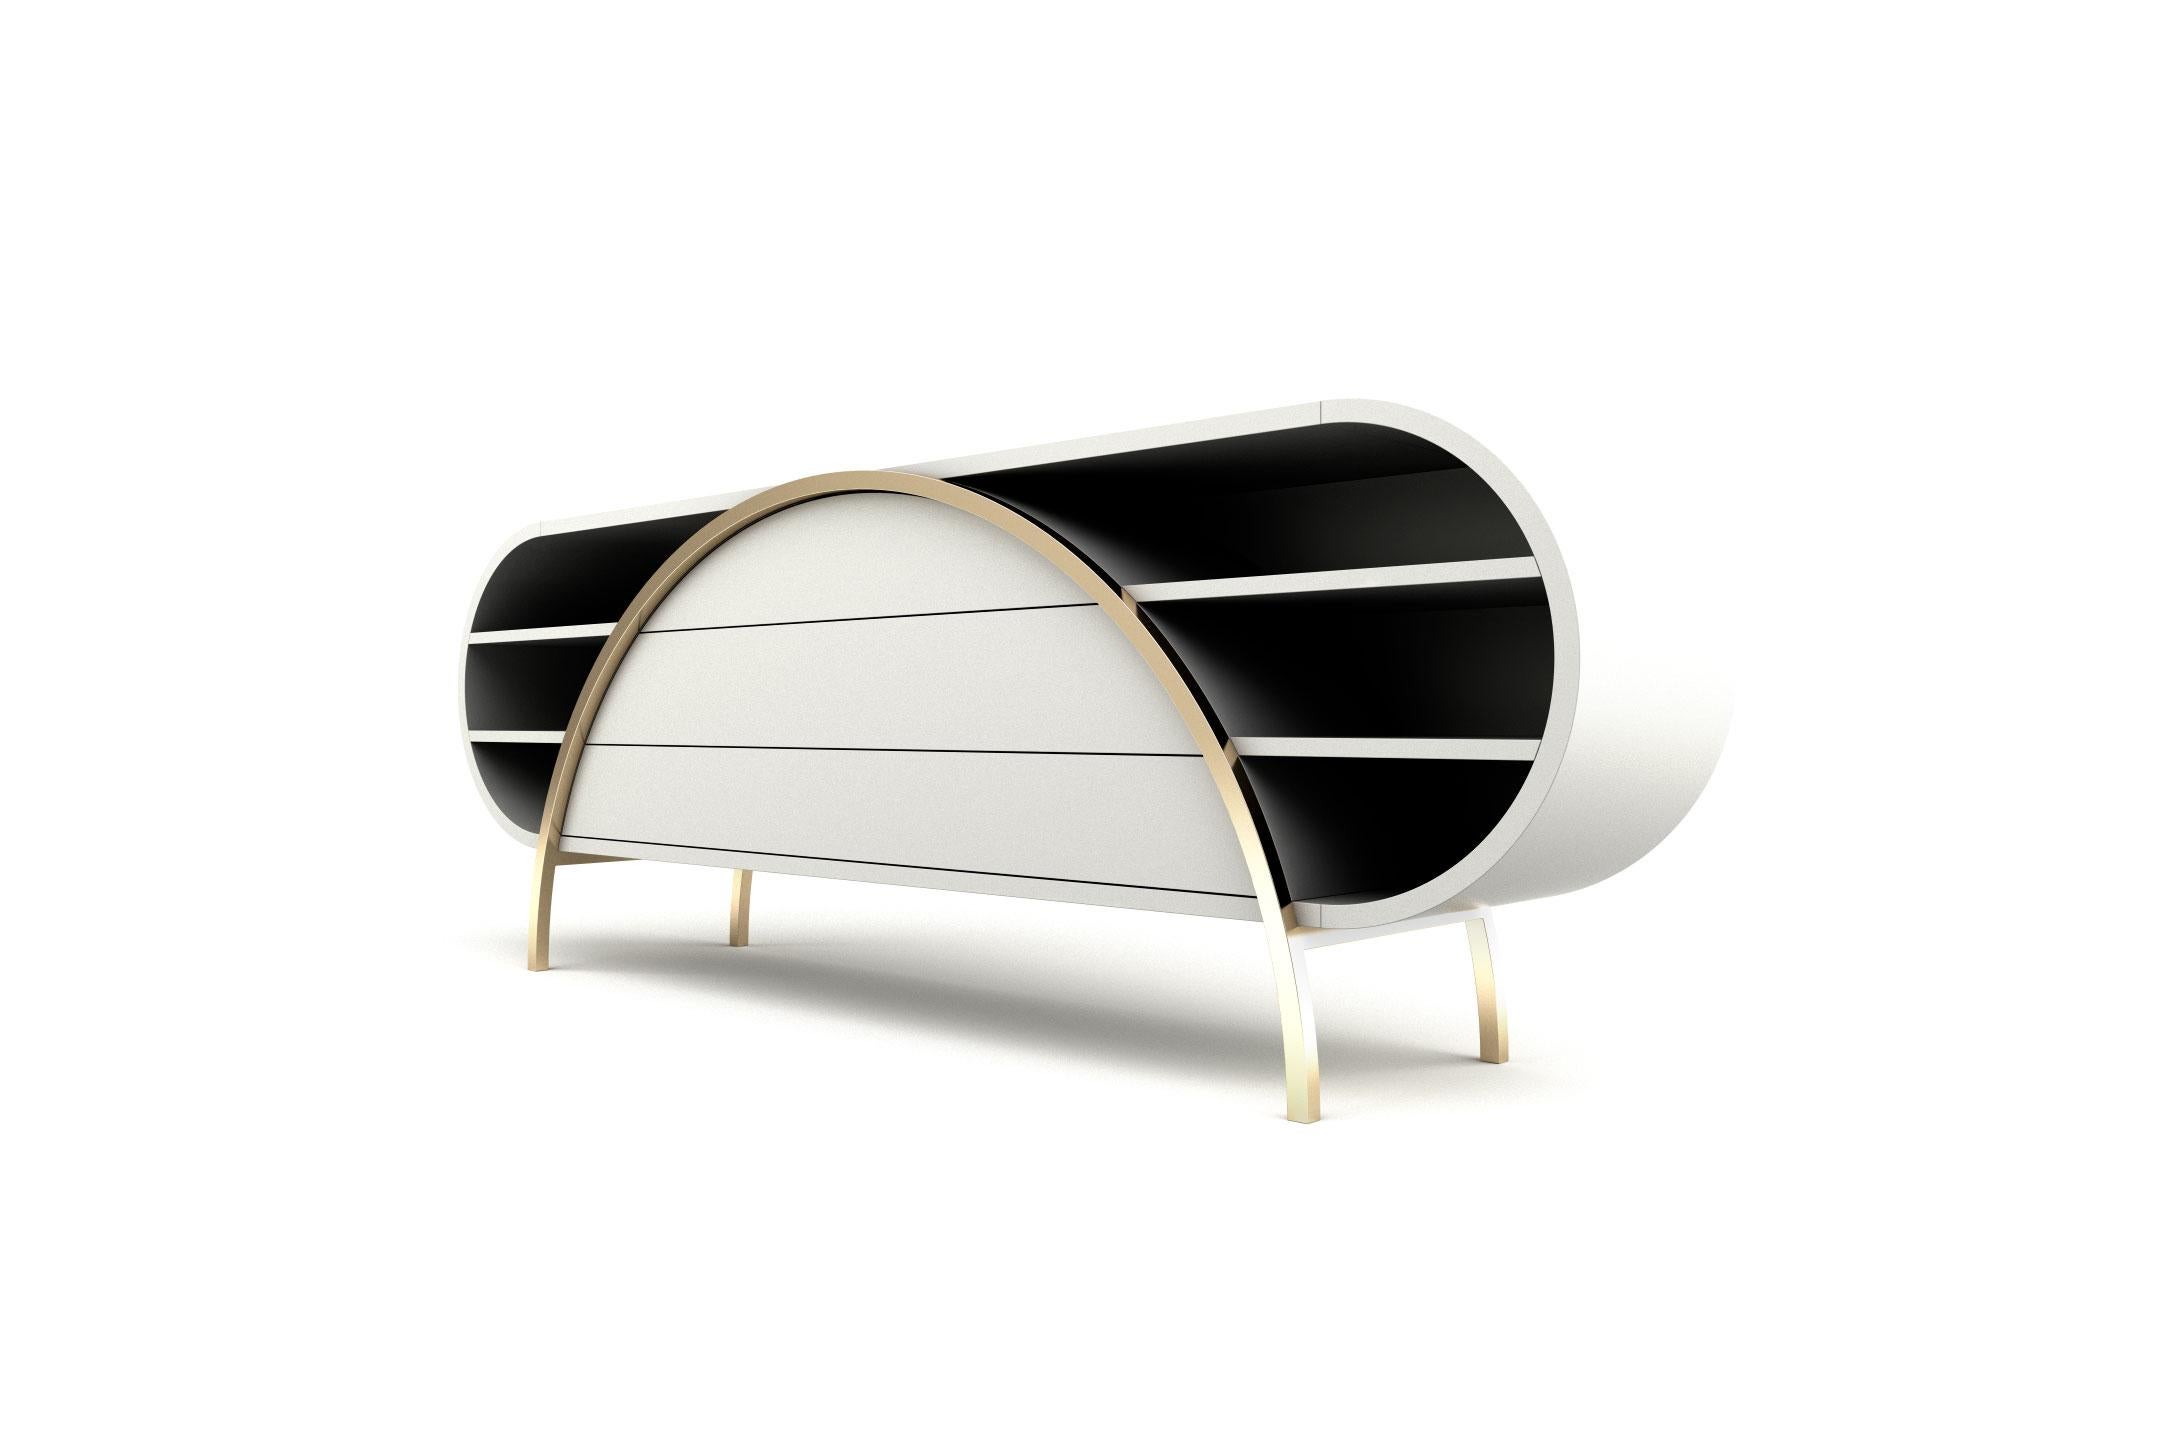 European Crescent Sideboard - Modern White Lacquered Sideboard with Brass Legs For Sale